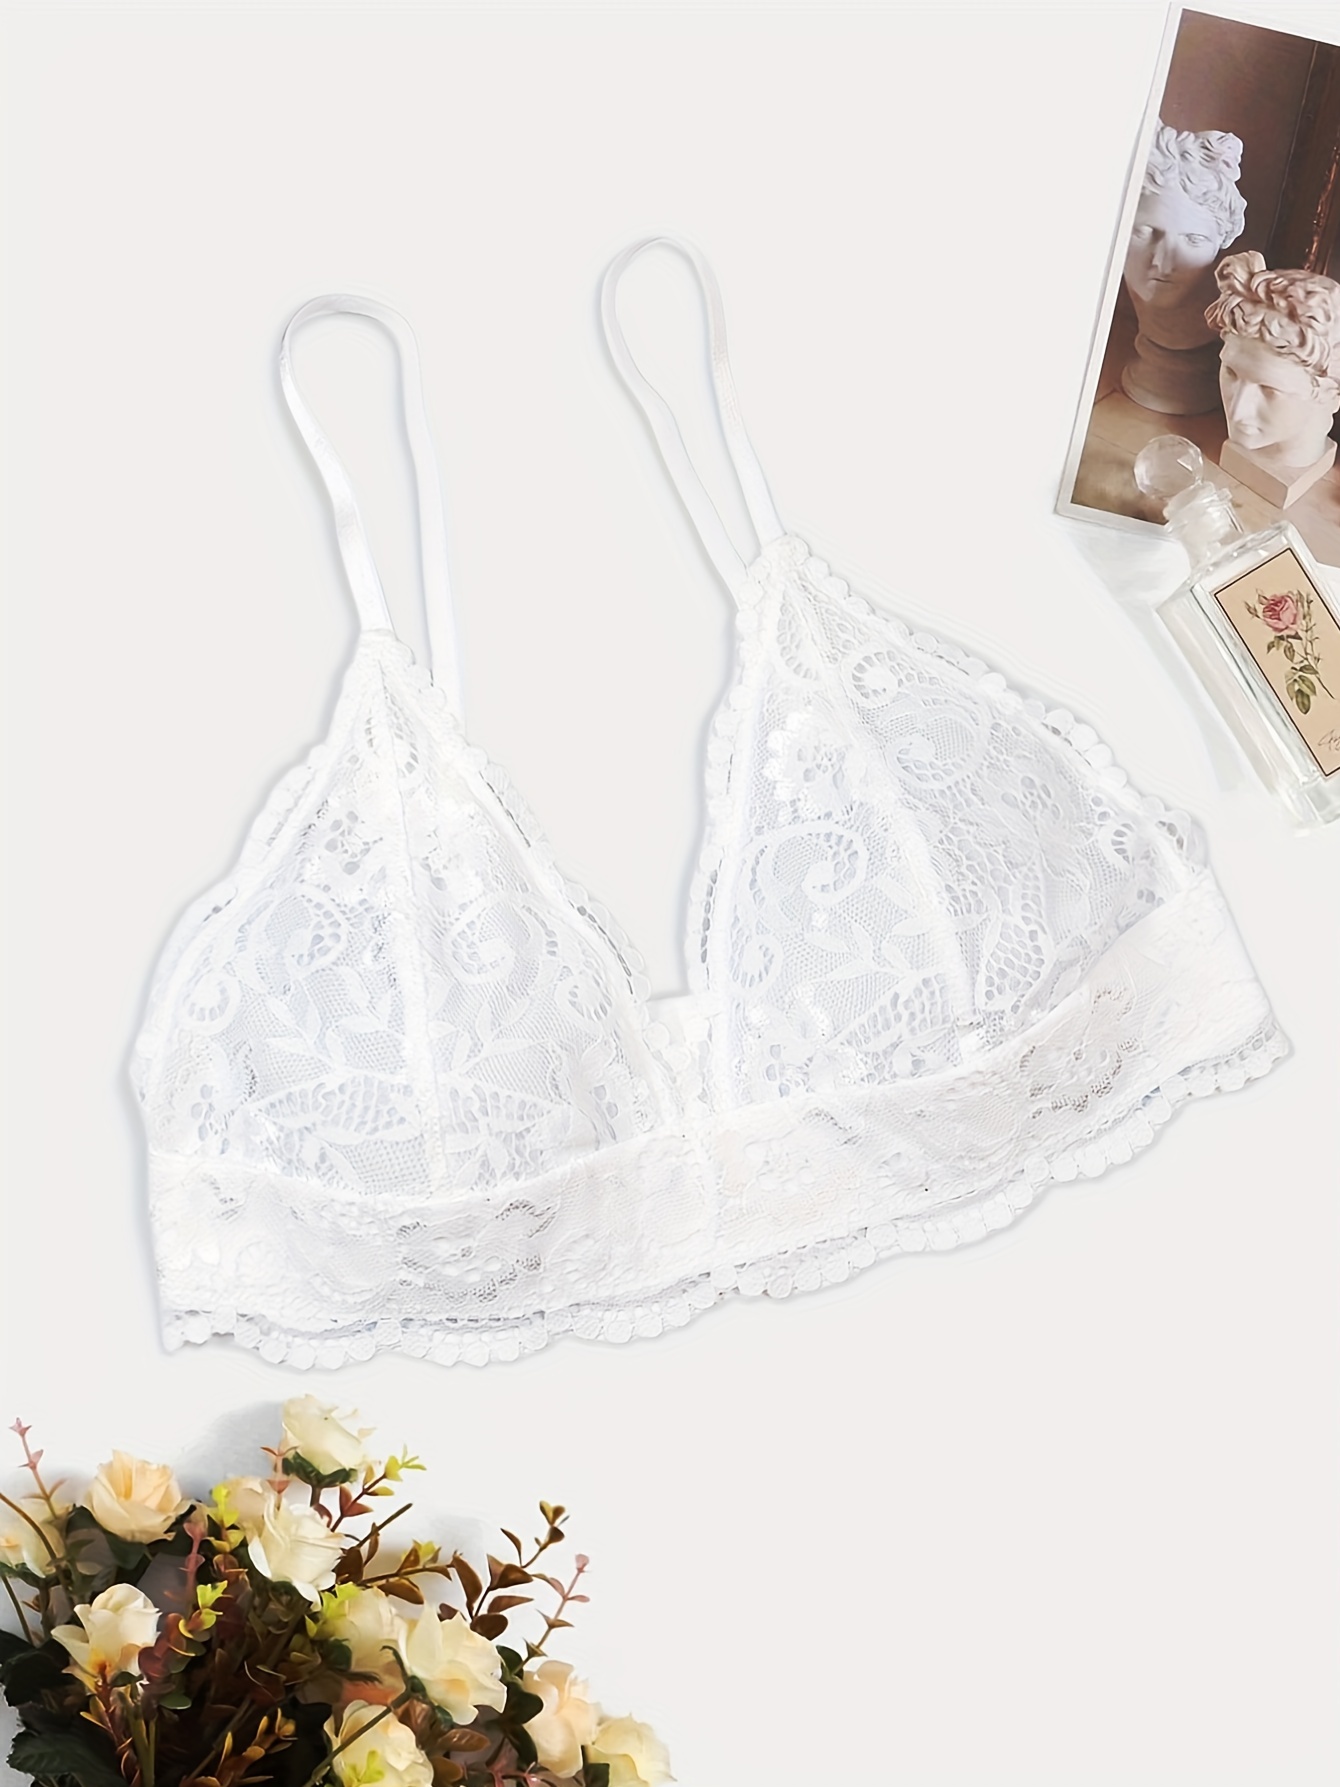 Seductive Women's See-Through Bra Set - Tempting Three-Point Lingerie for  Ultimate Sensuality